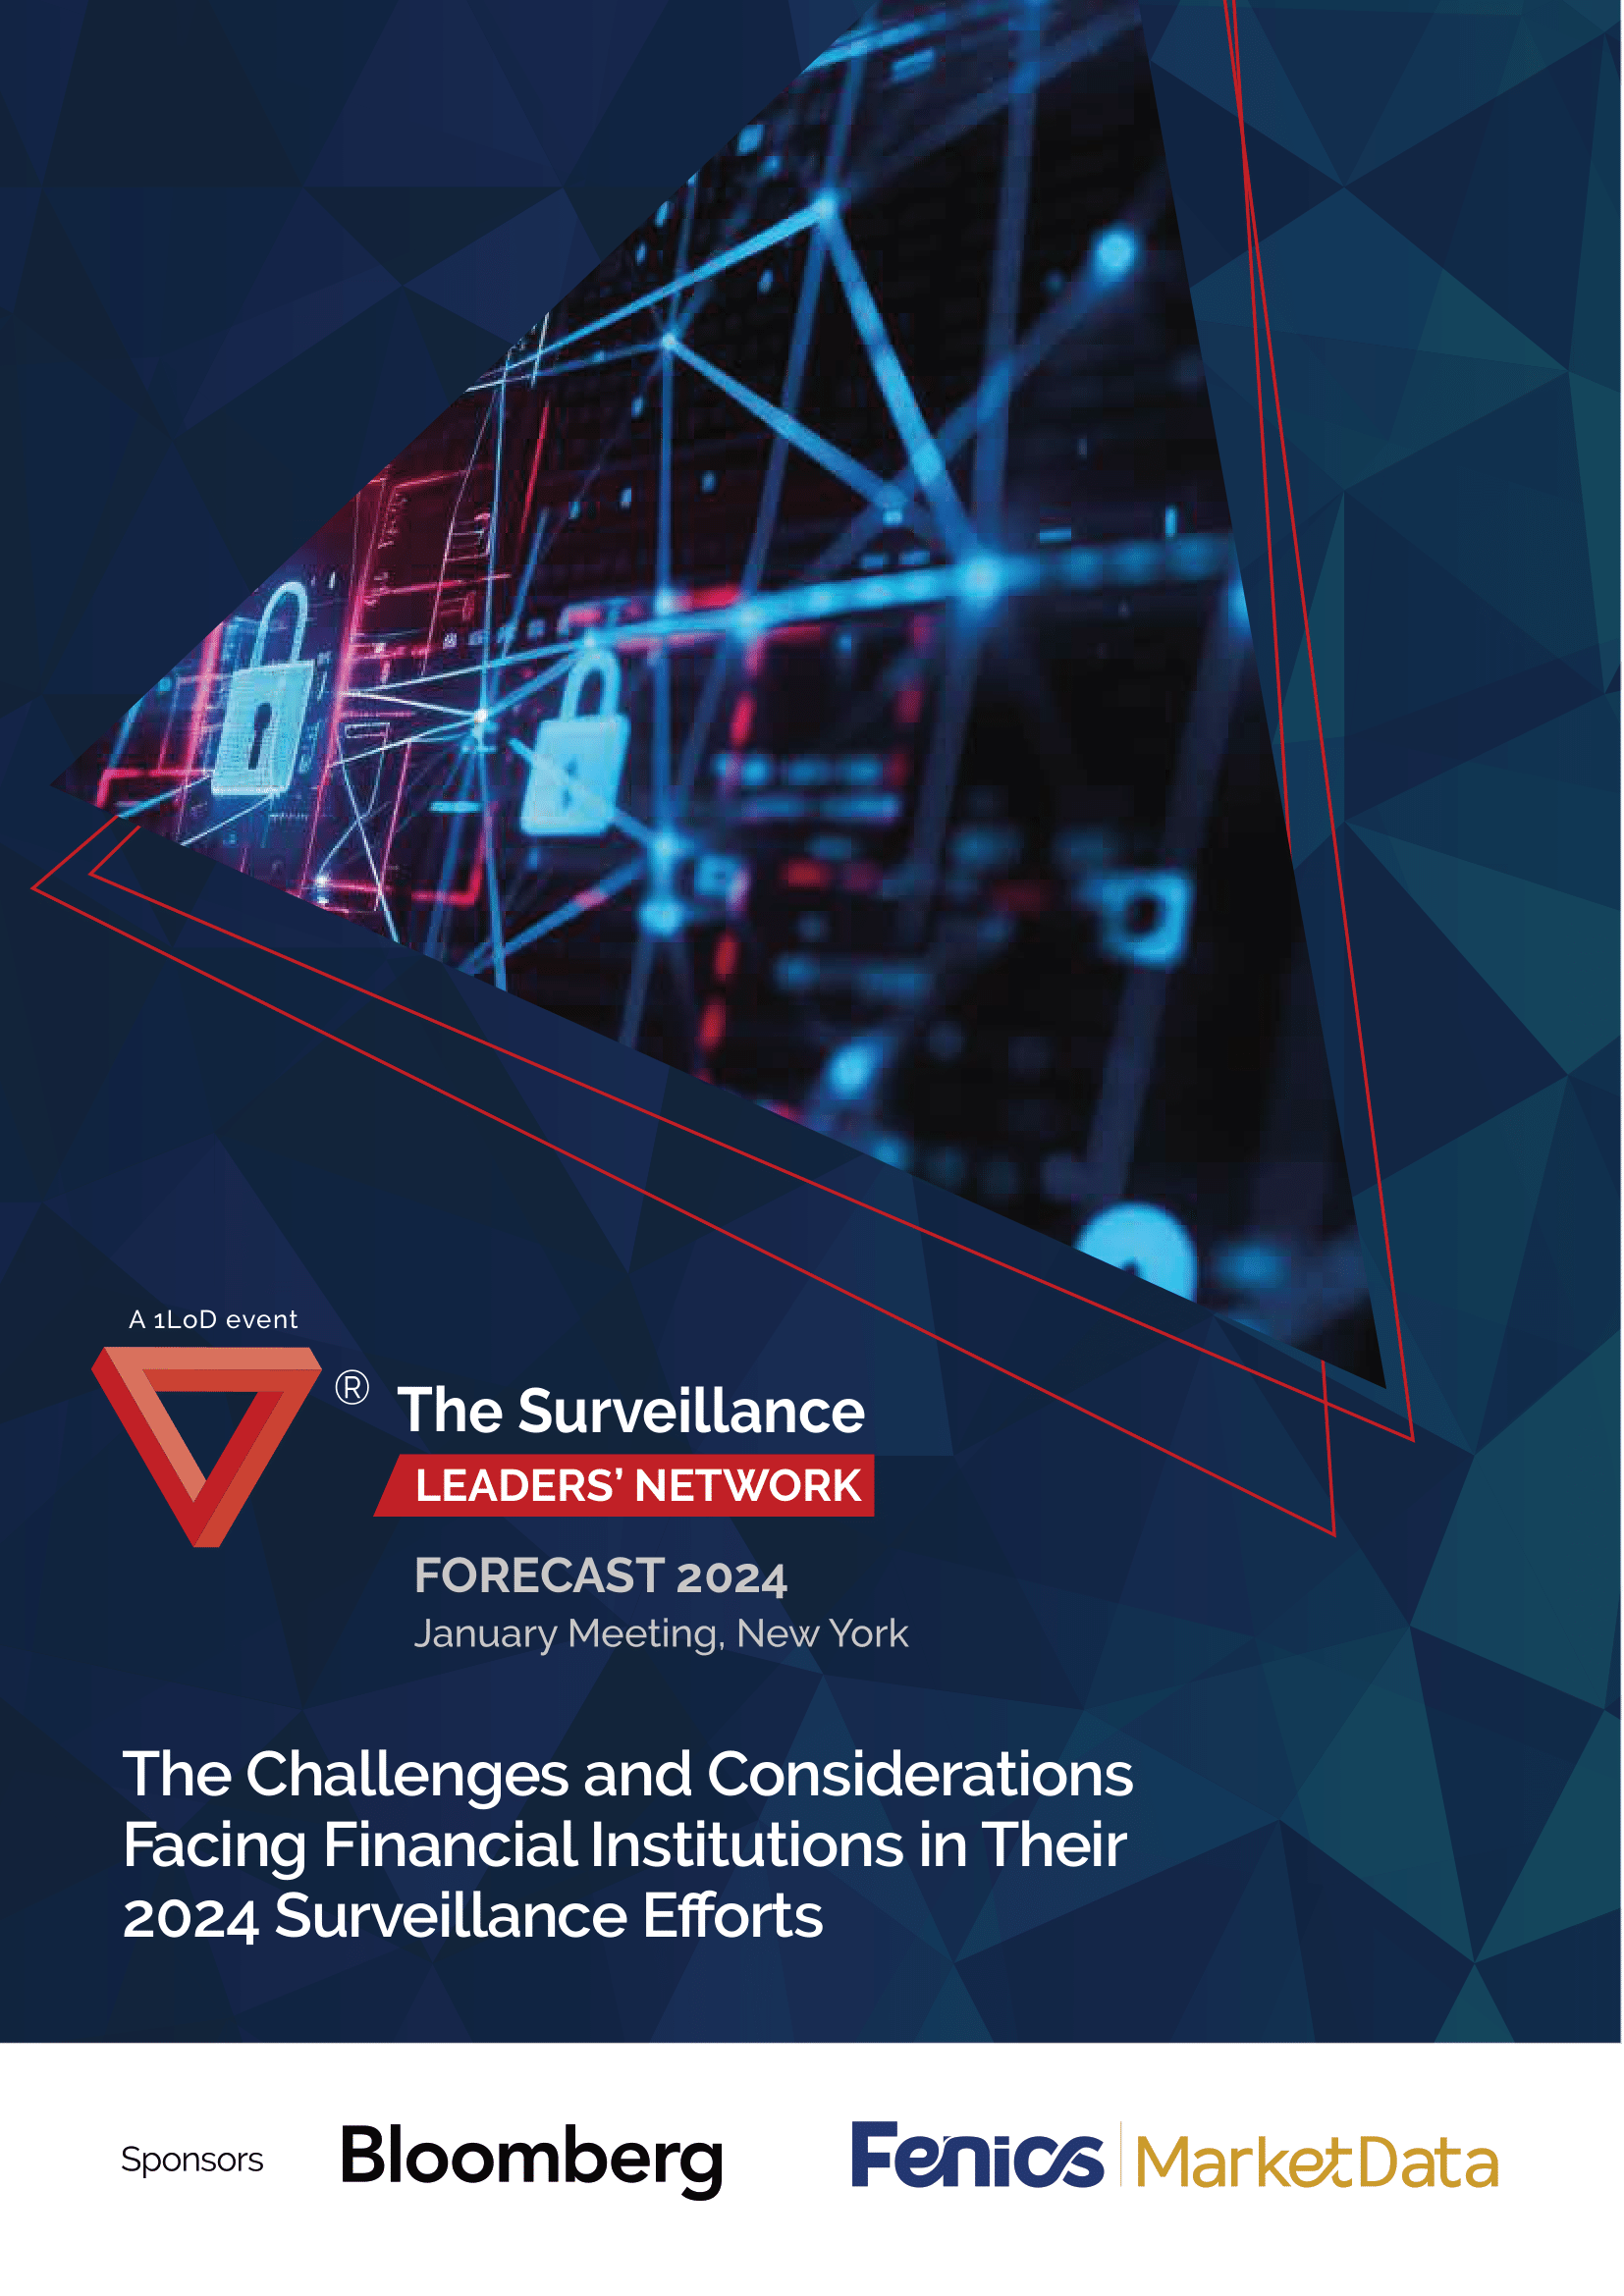 The Challenges and Considerations Facing Financial Institutions in Their 2024 Surveillance Efforts